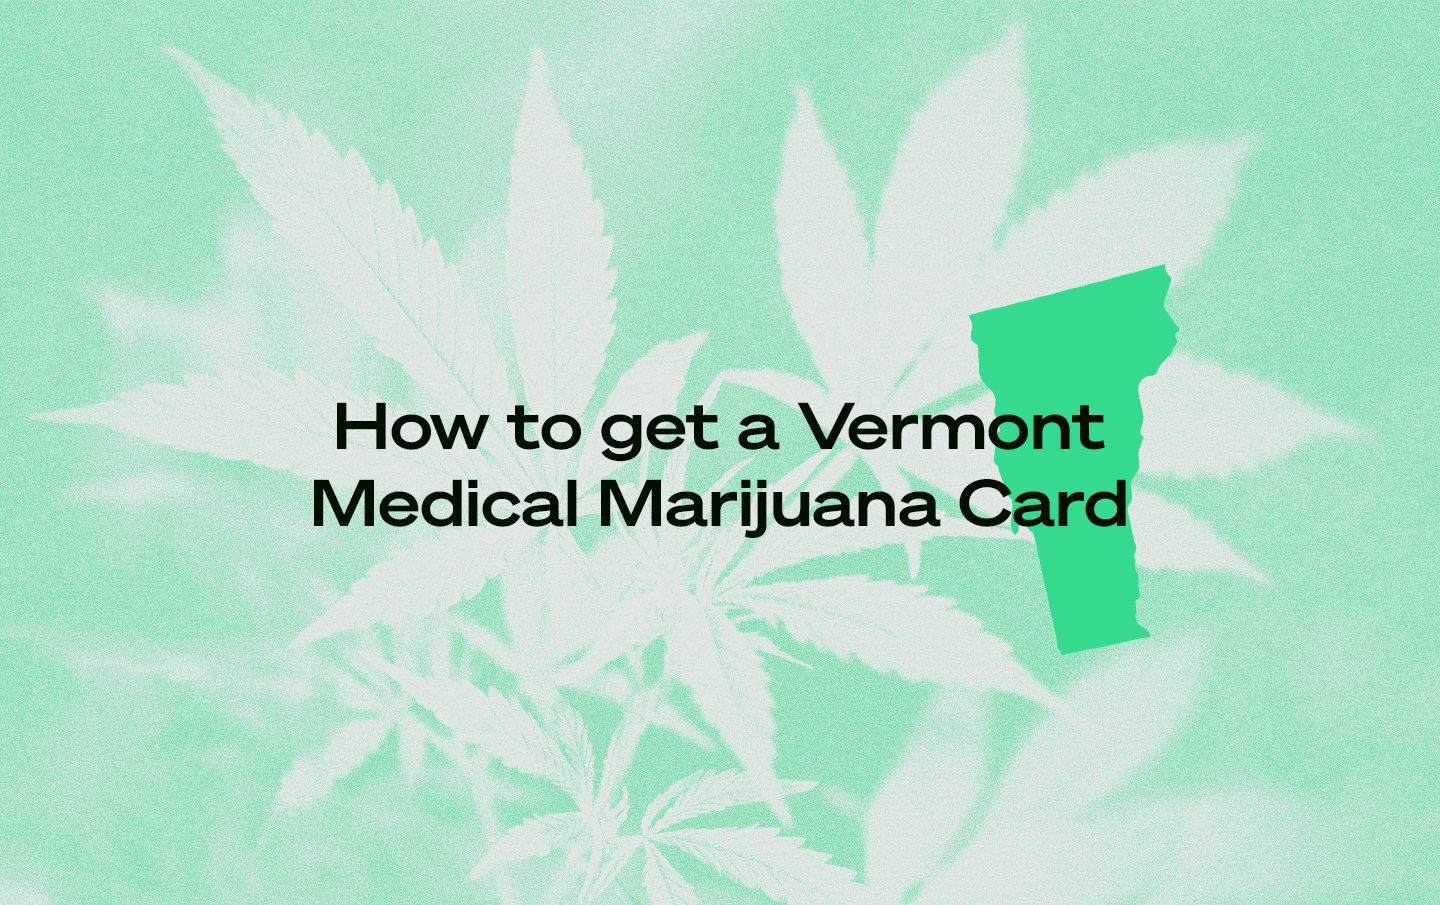 How to get a Vermont medical marijuana card and cannabis certificate online.